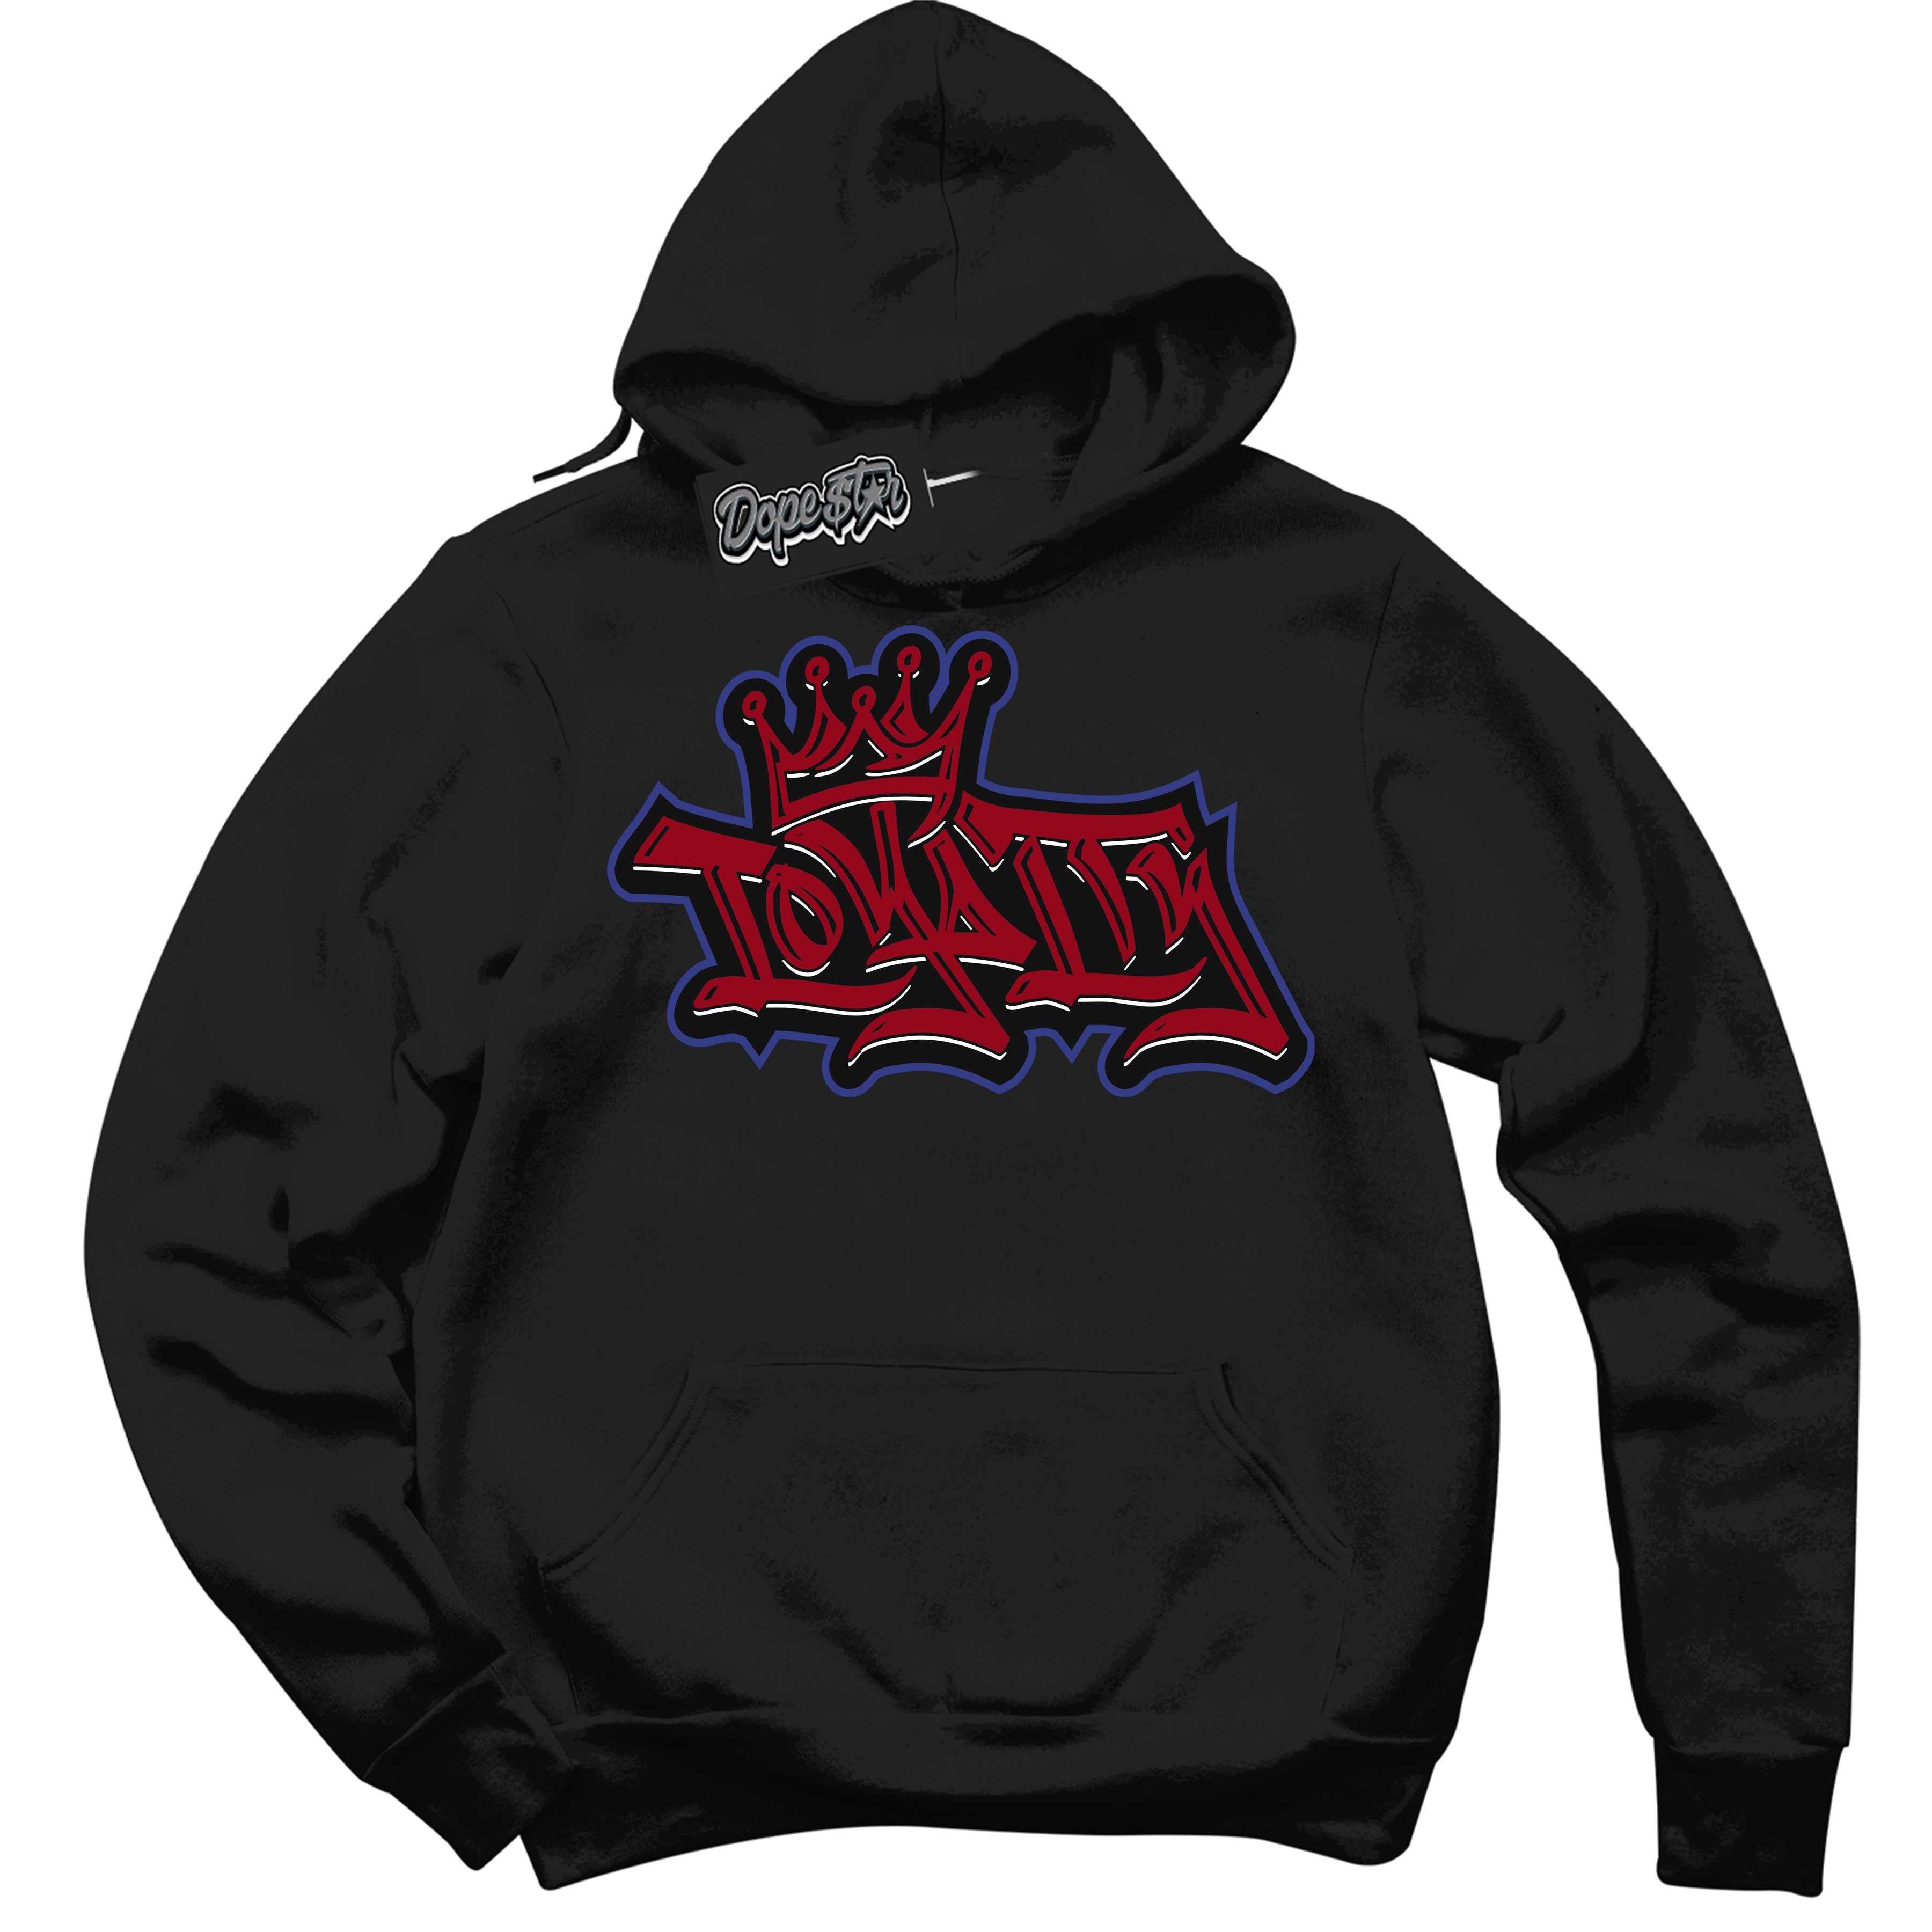 Cool Black Hoodie with “ Loyalty Crown ”  design that Perfectly Matches Playoffs 8s Sneakers.